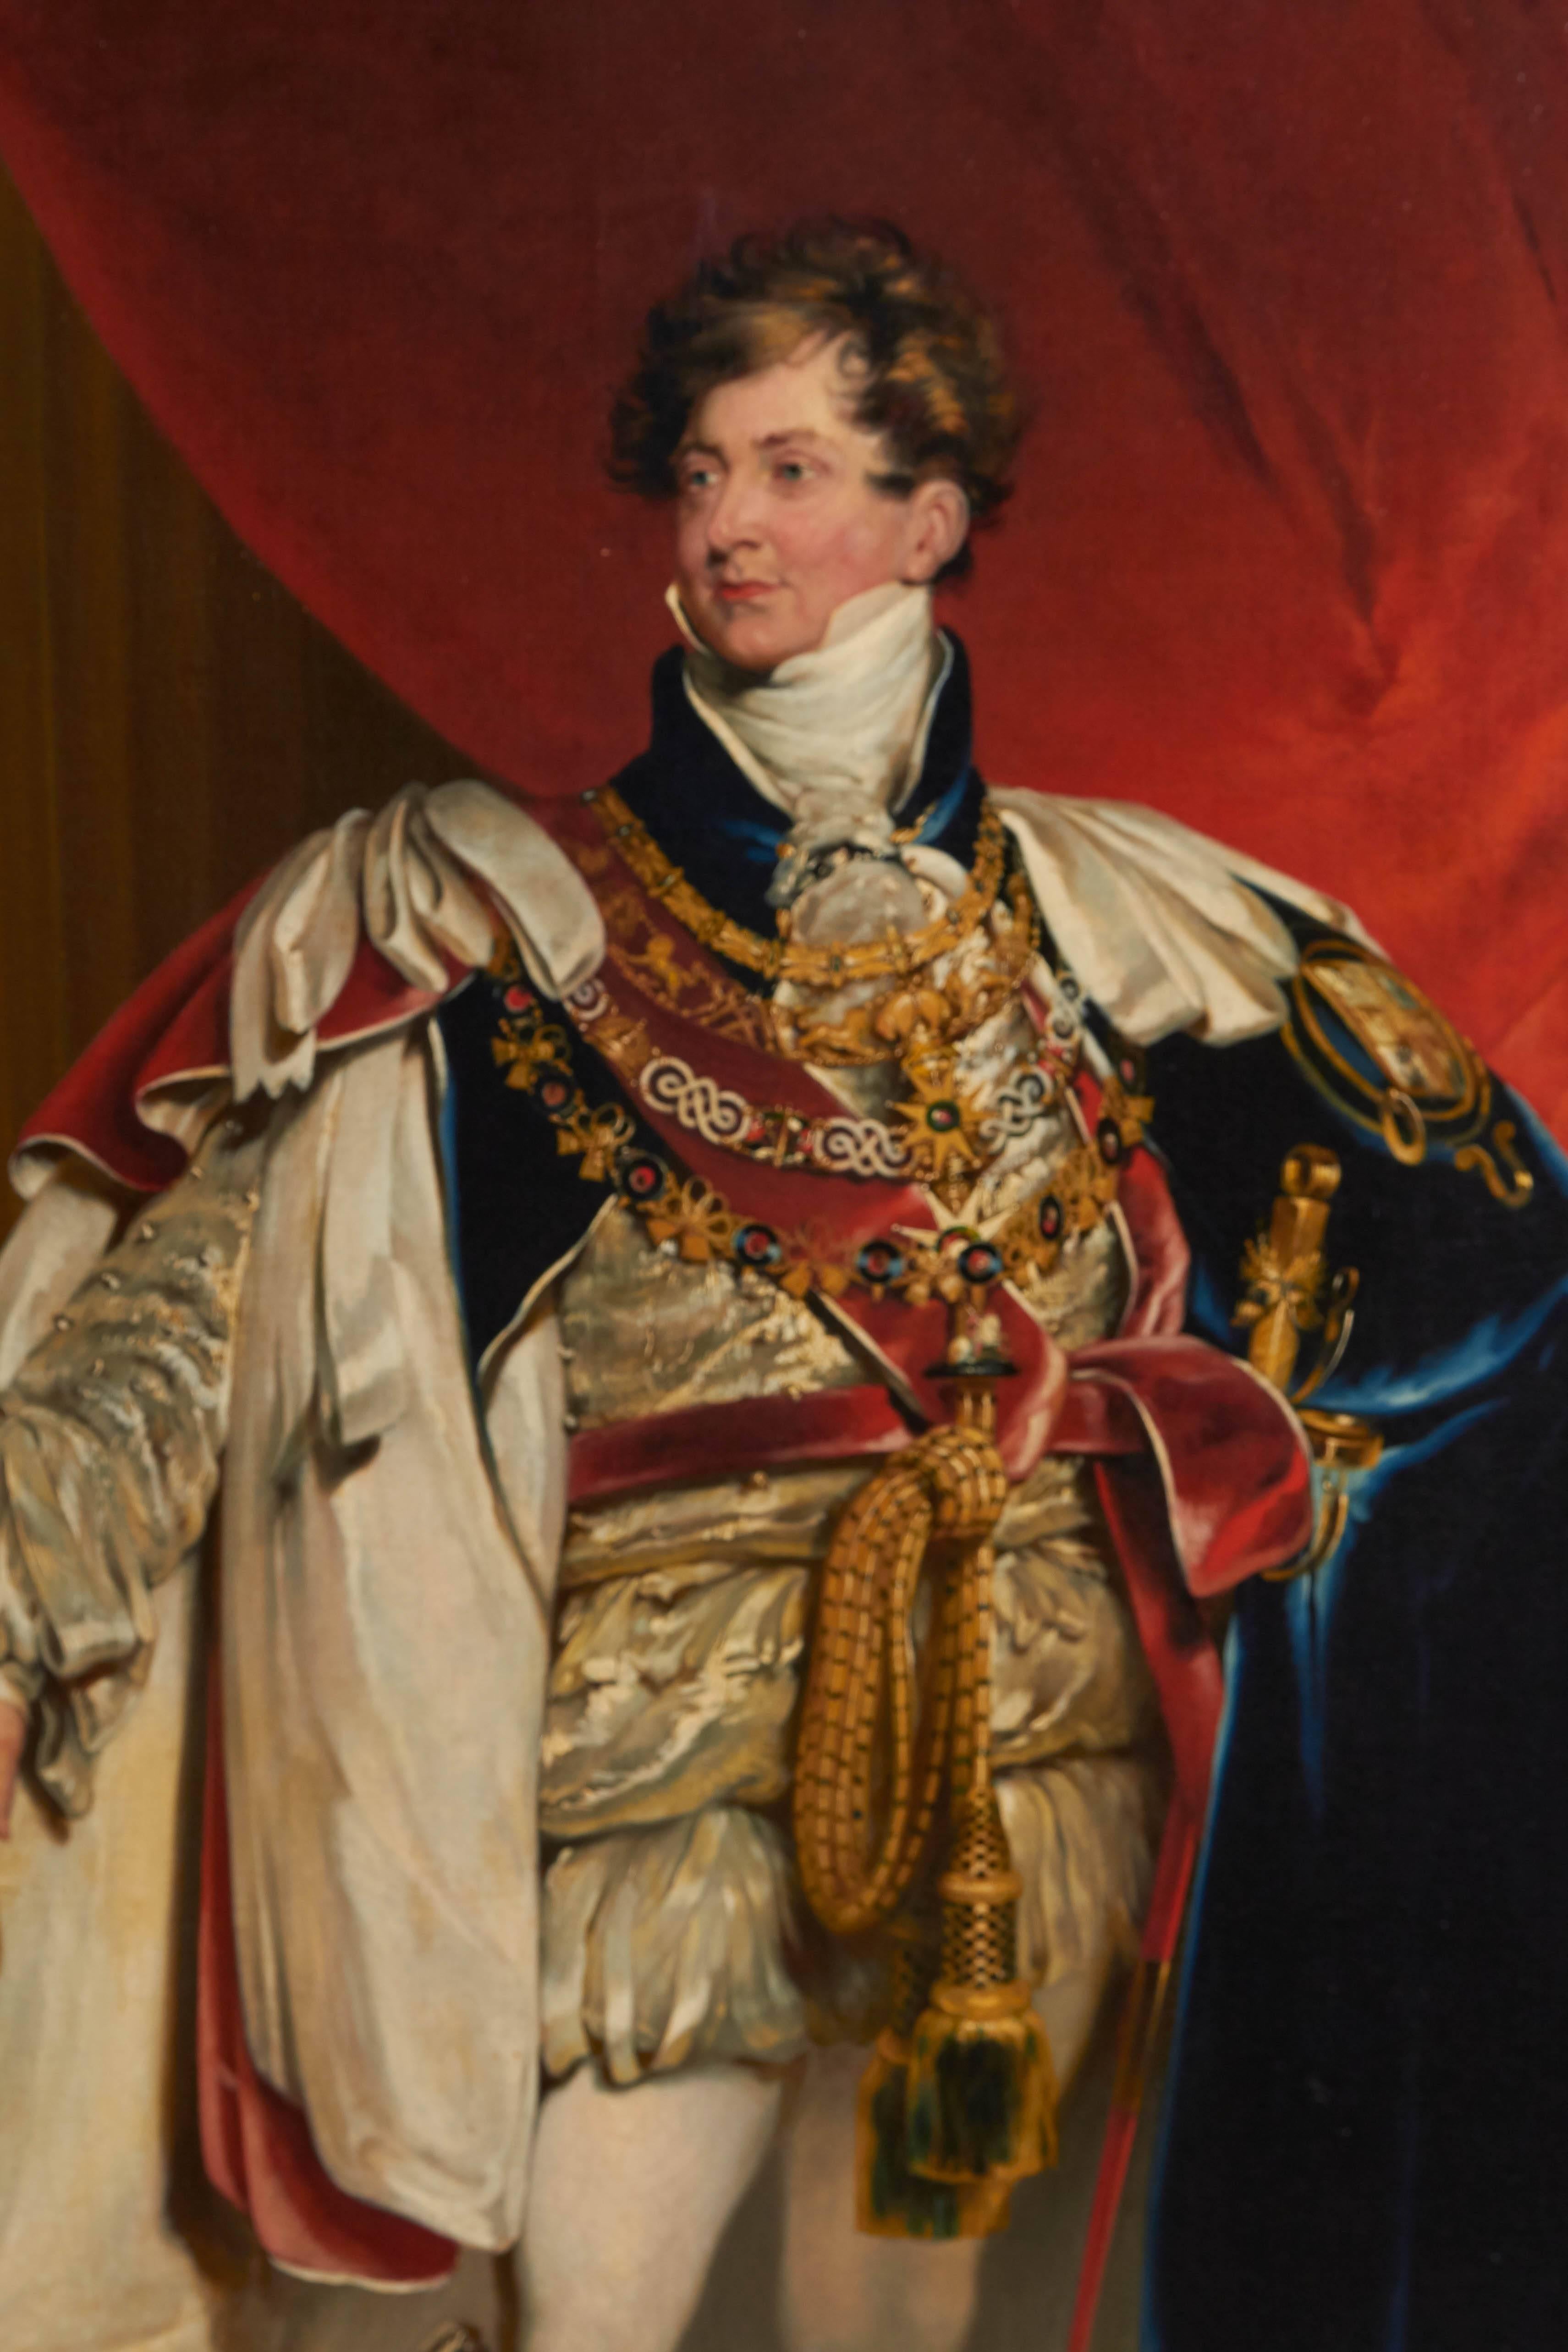 A museum copy of the oil on canvas coronation portrait of King George IV (1762-1830), from the studio of Sir Thomas Lawrence (1769-1830), currently on display in the Baltimore Museum of Art. Includes original giltwood Rococo style frame. Excellent